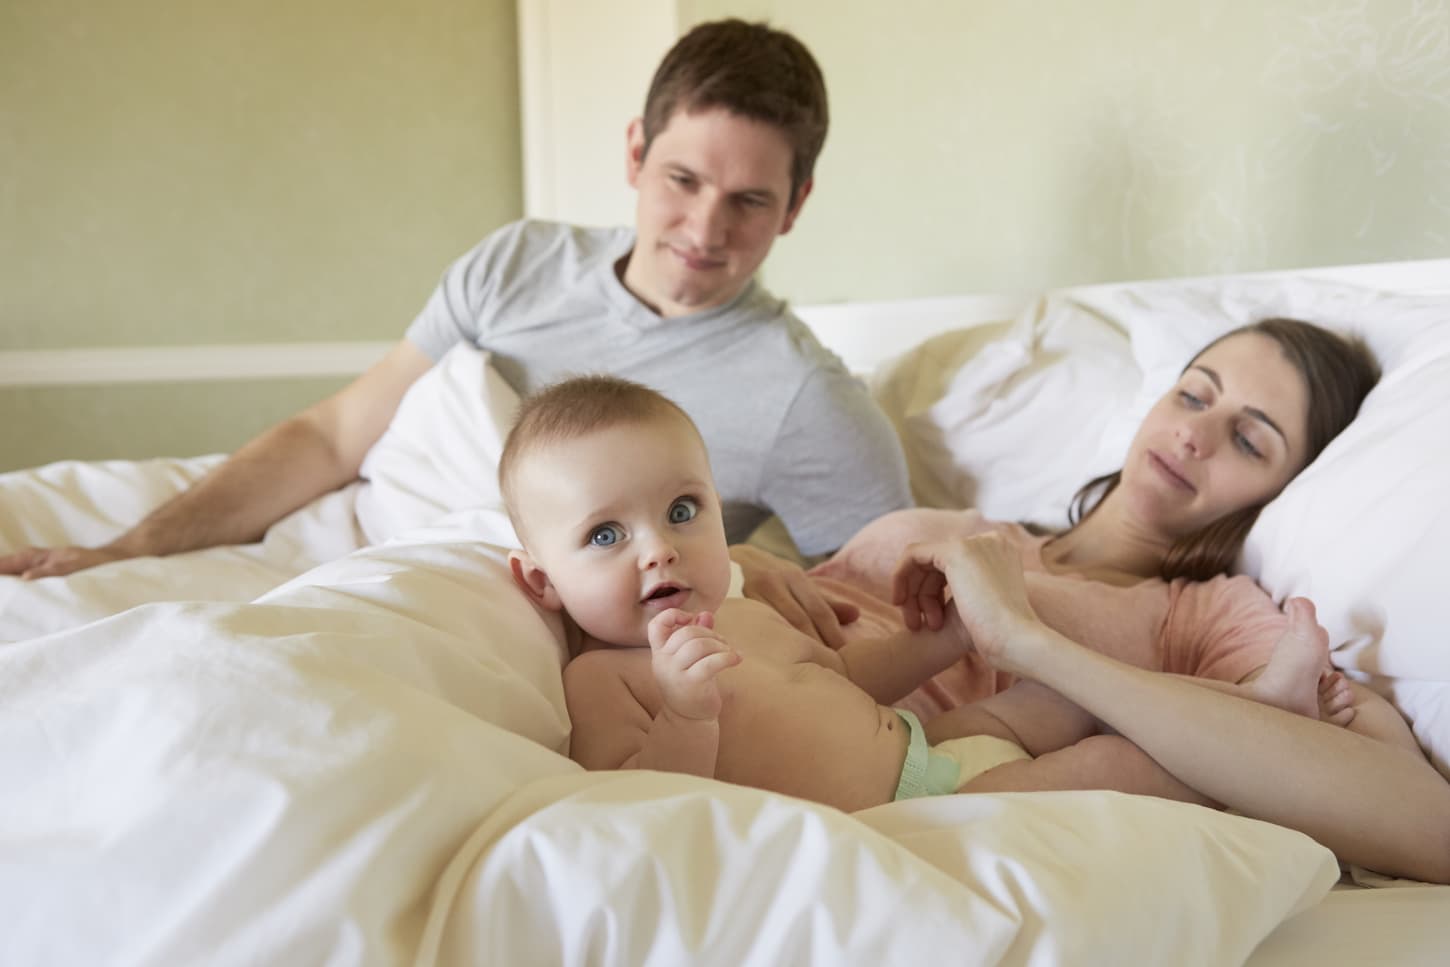 An image of a baby girl lying in bed with her parents.